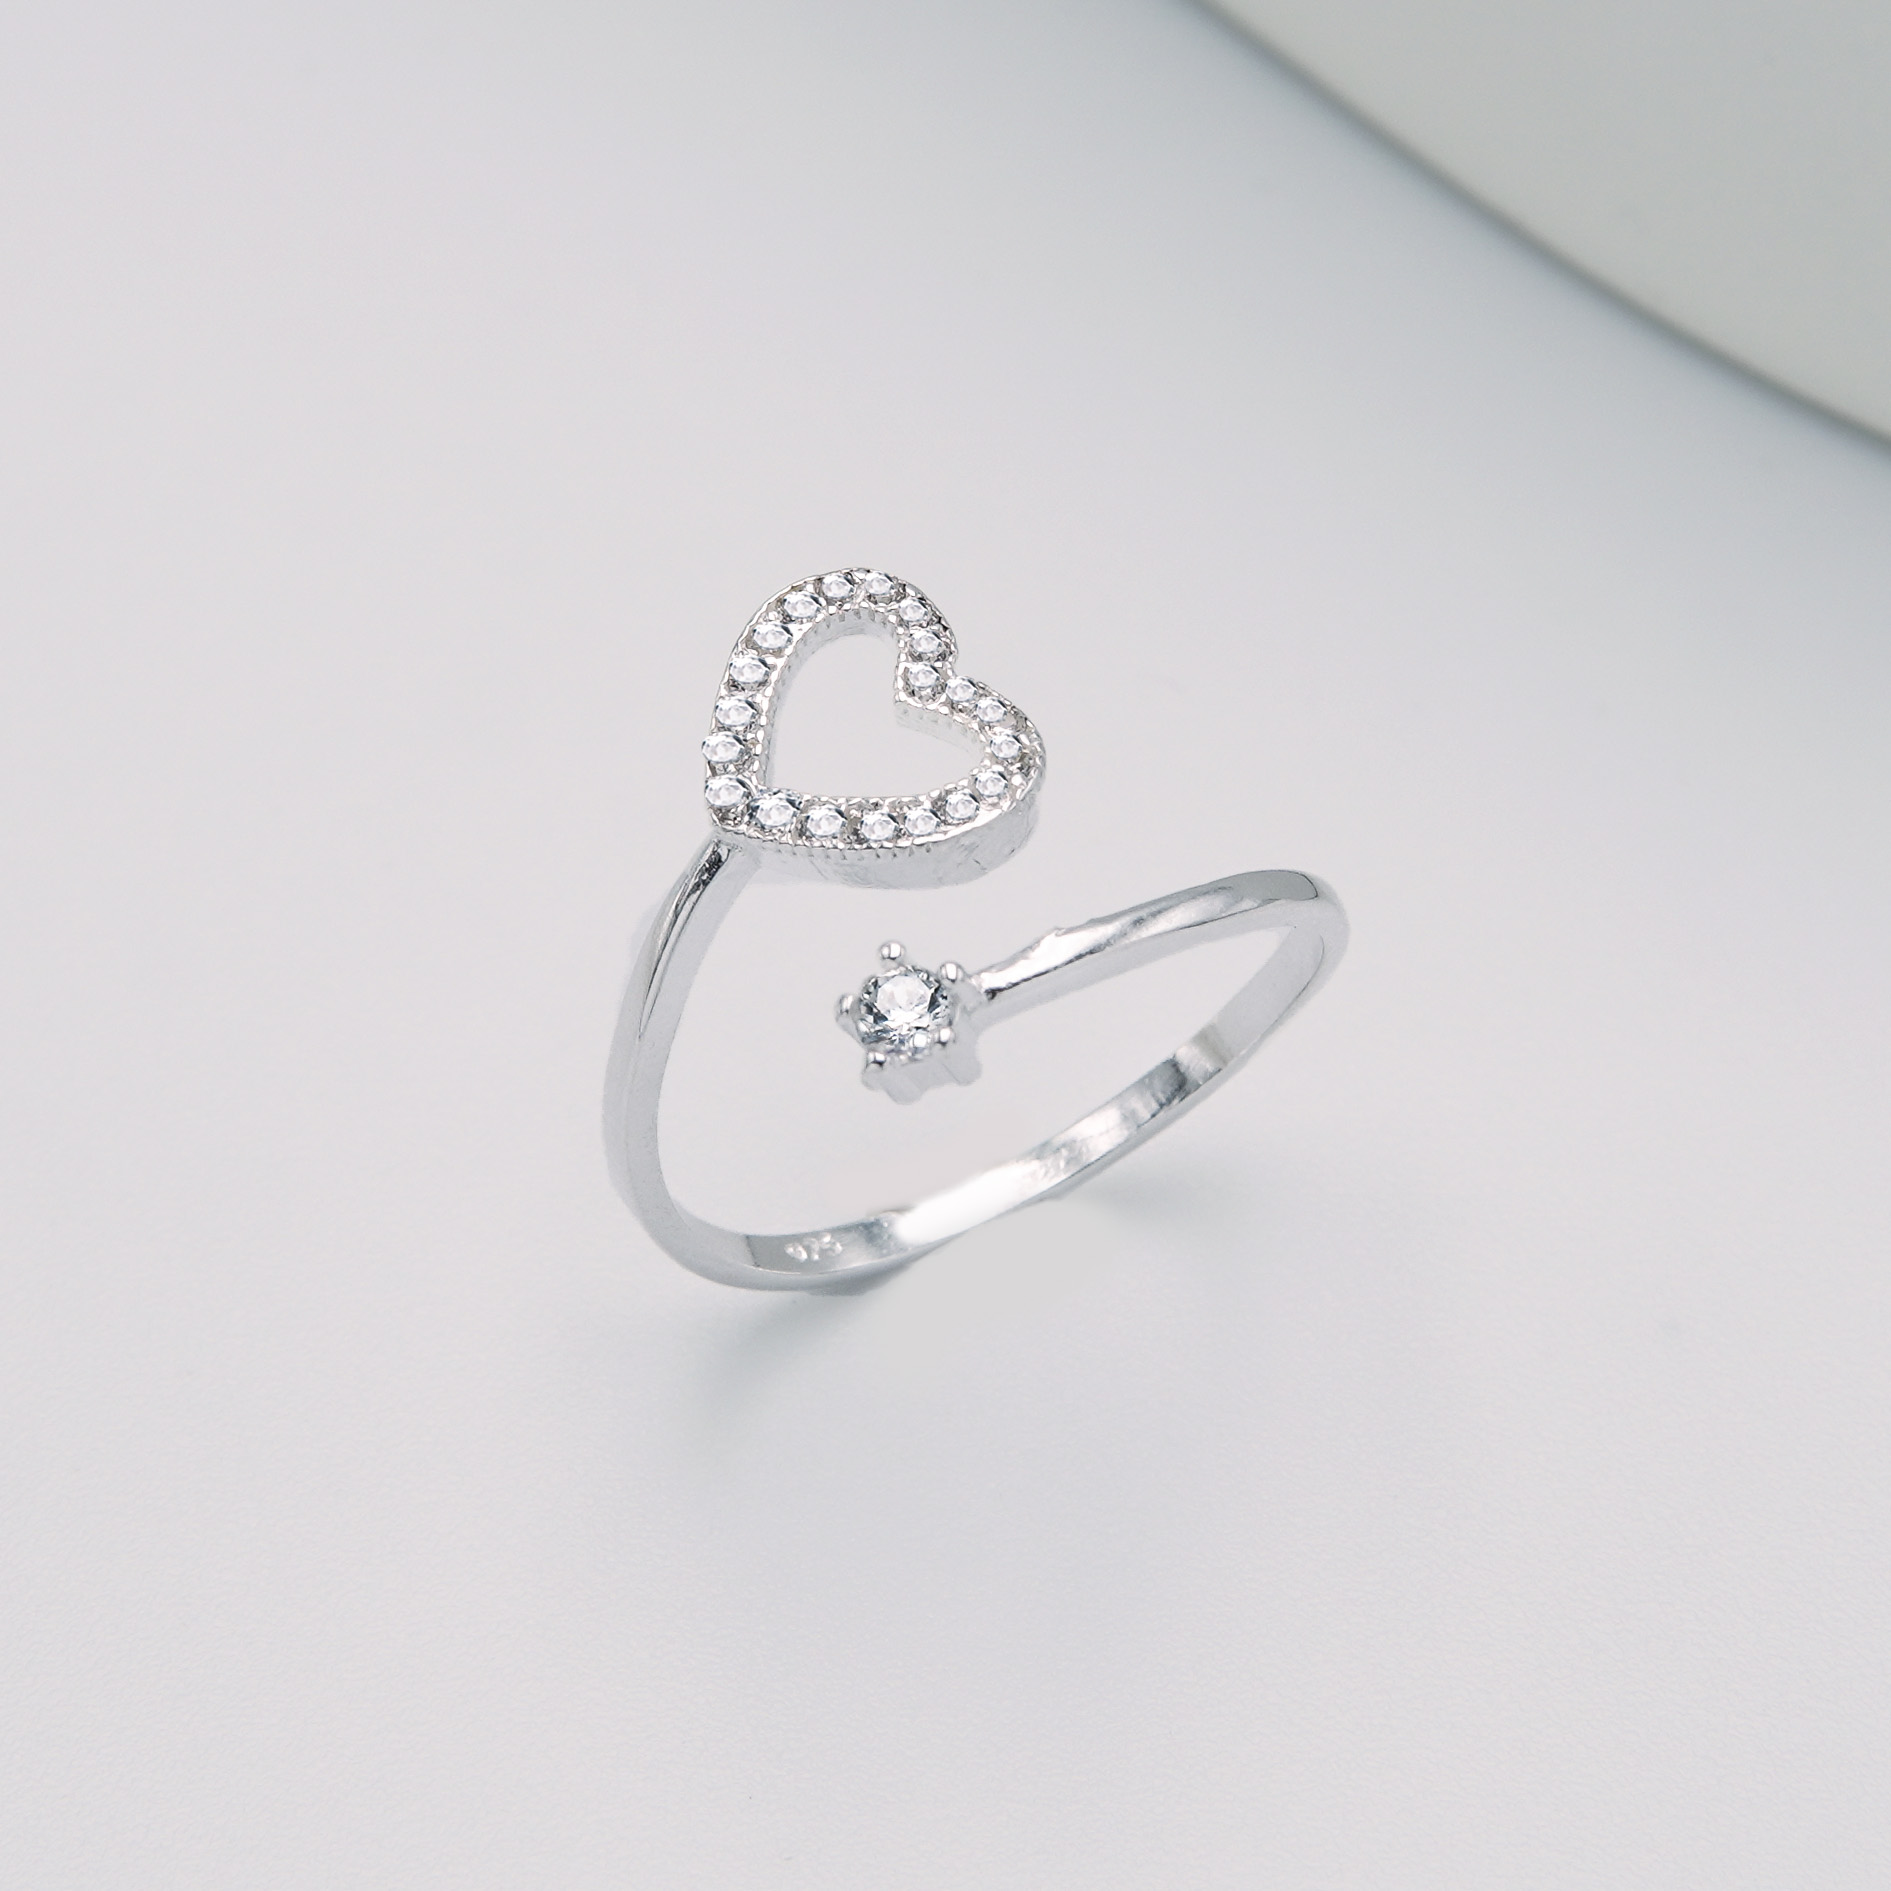 Heart star passion Silver ring 925 - SWEVALI